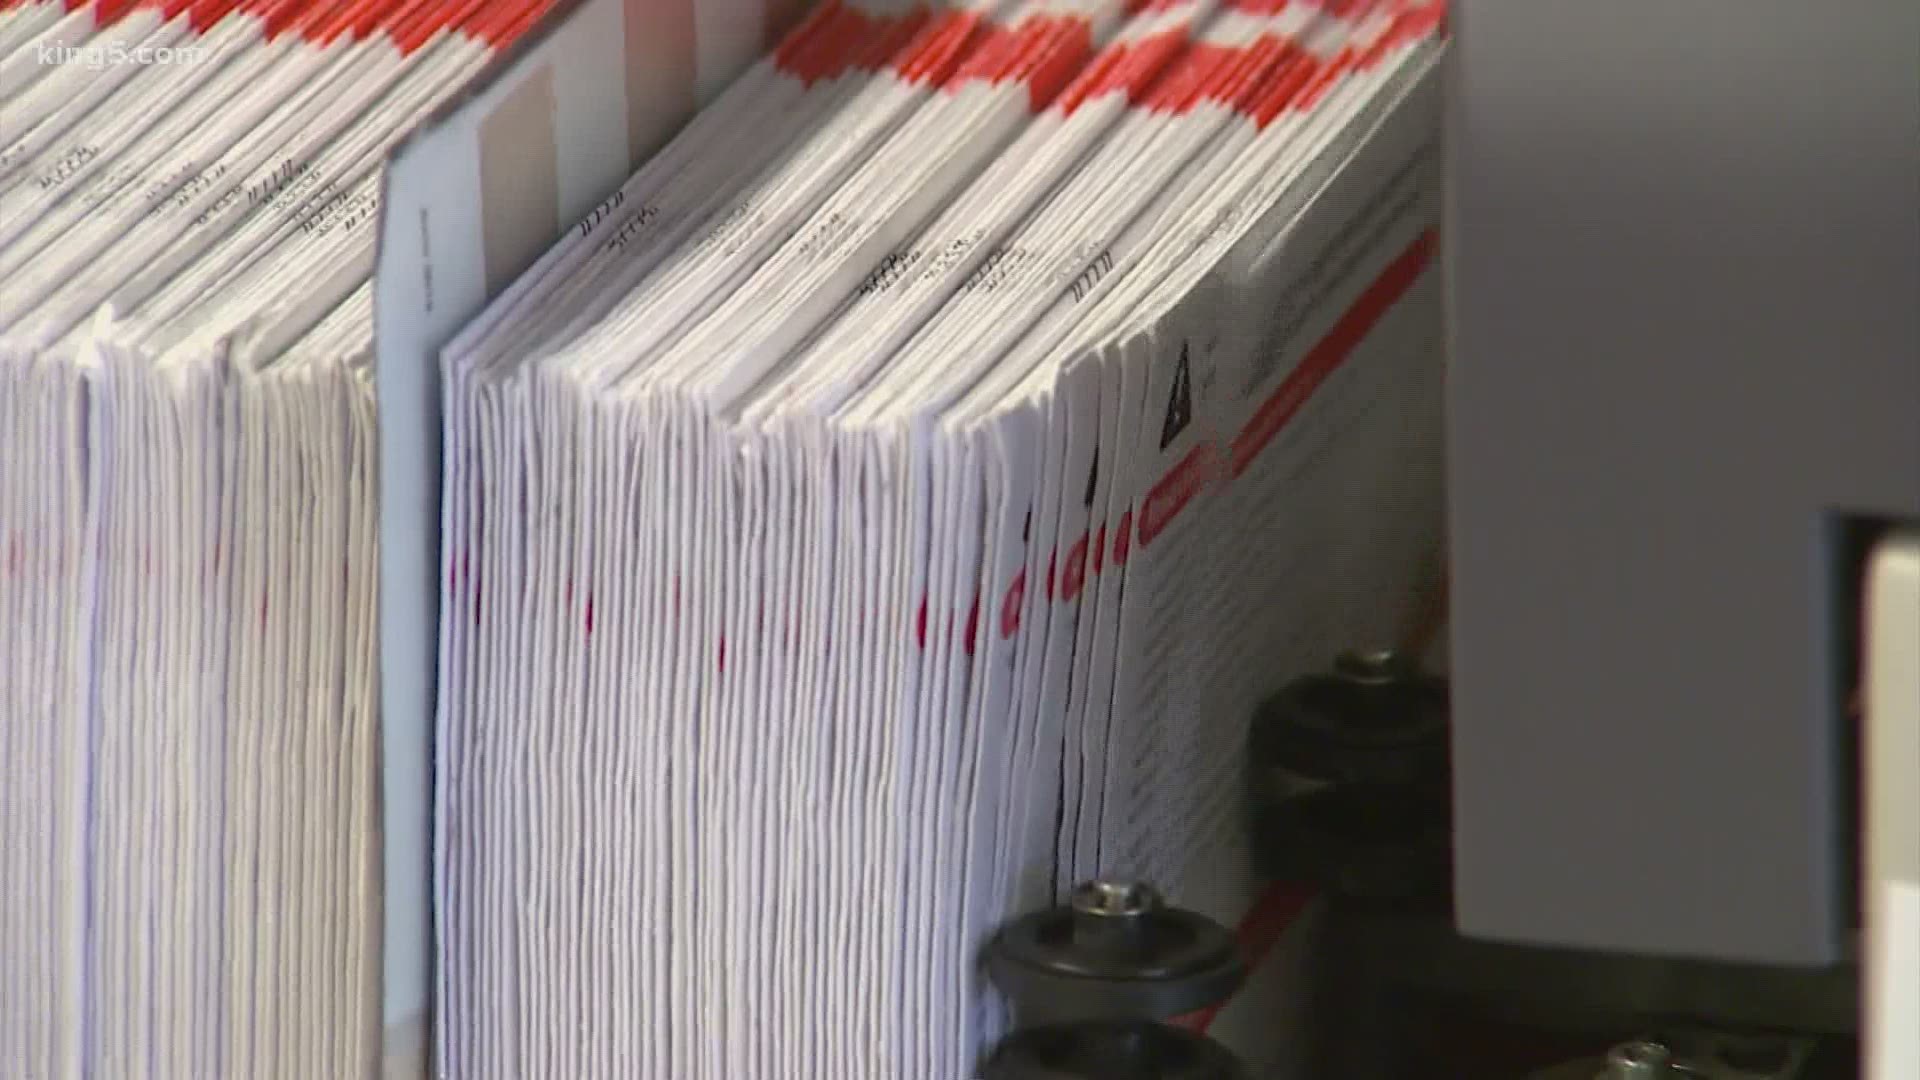 Washington voters will soon have their ballots. Now they must decide if they’ll return them using the U.S. Postal Service or an official county drop box.